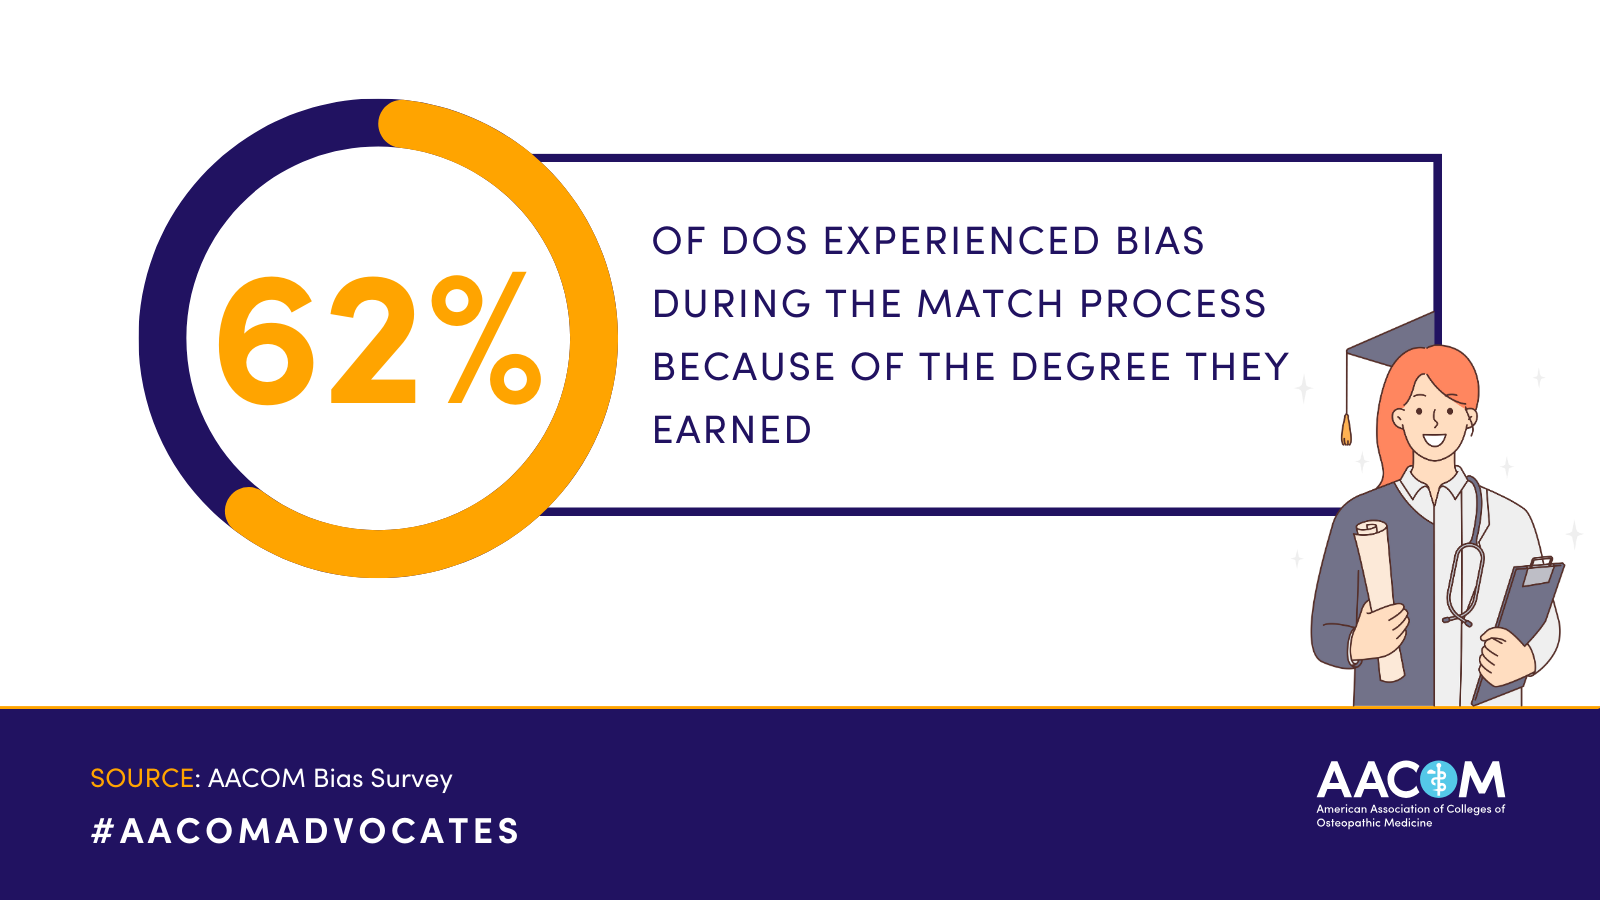 62% of DOs experienced bias during the Match process because of the degree they earned